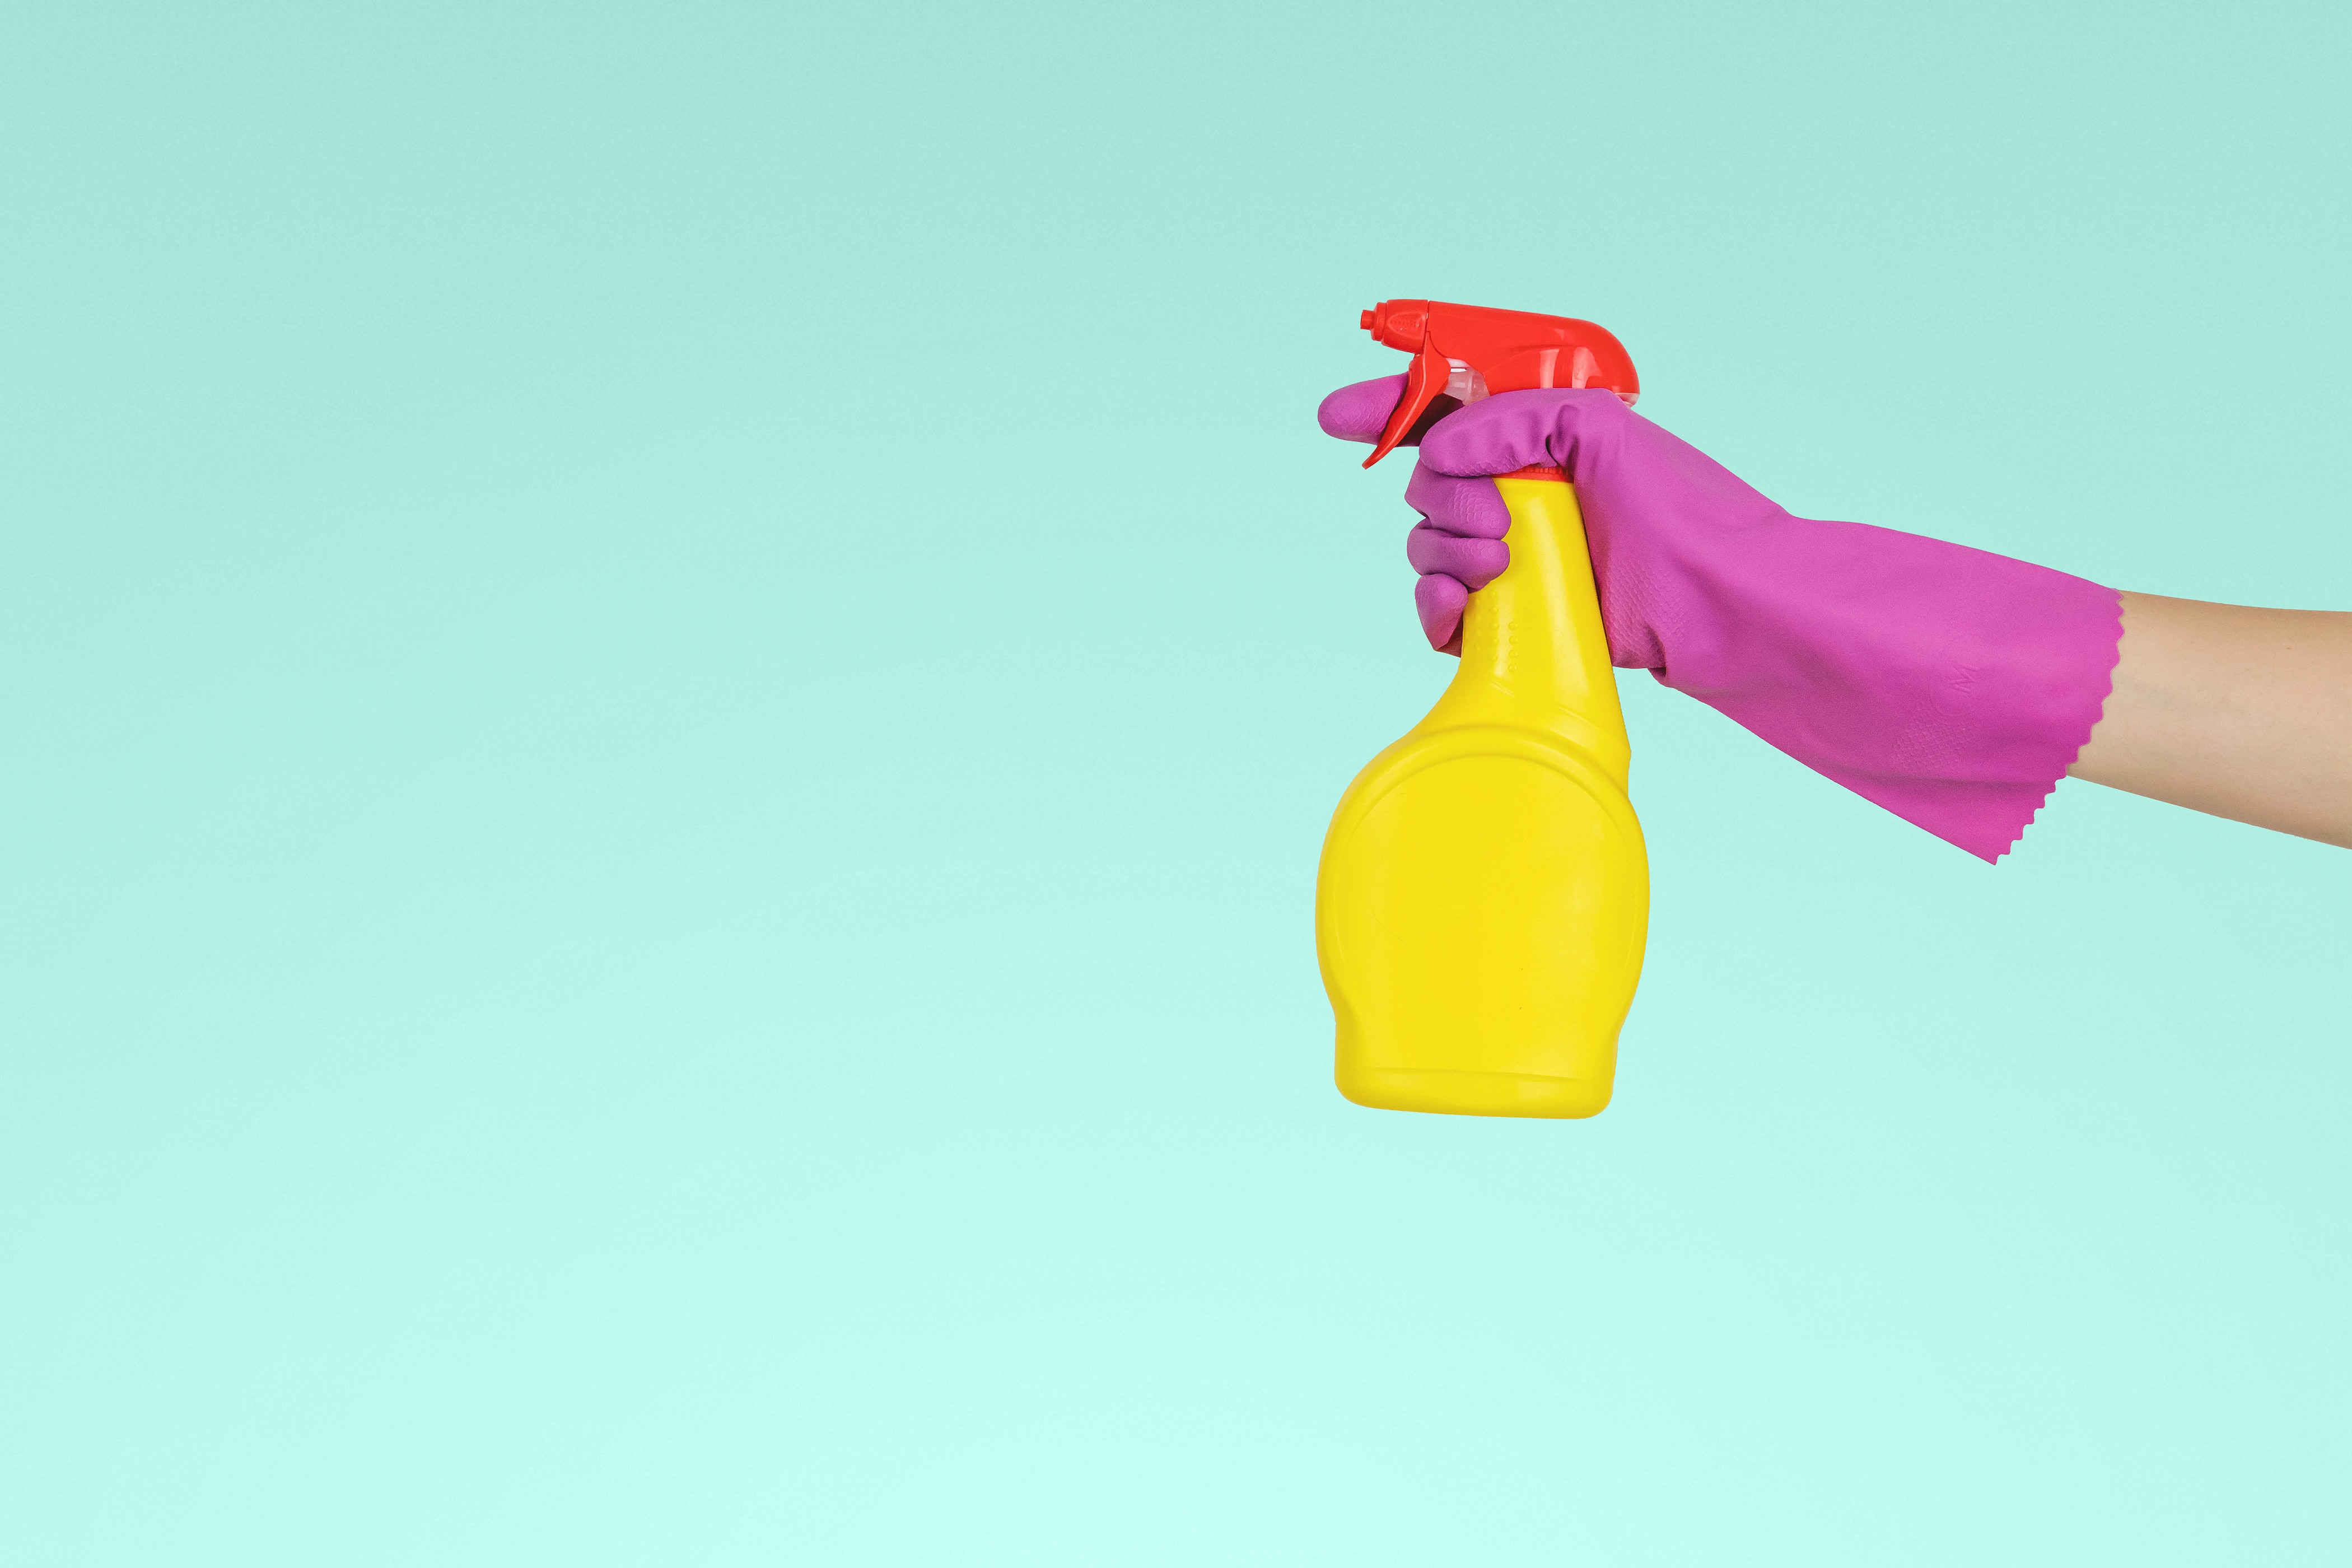 Brightly colored spray bottle held with purple glove over blue background